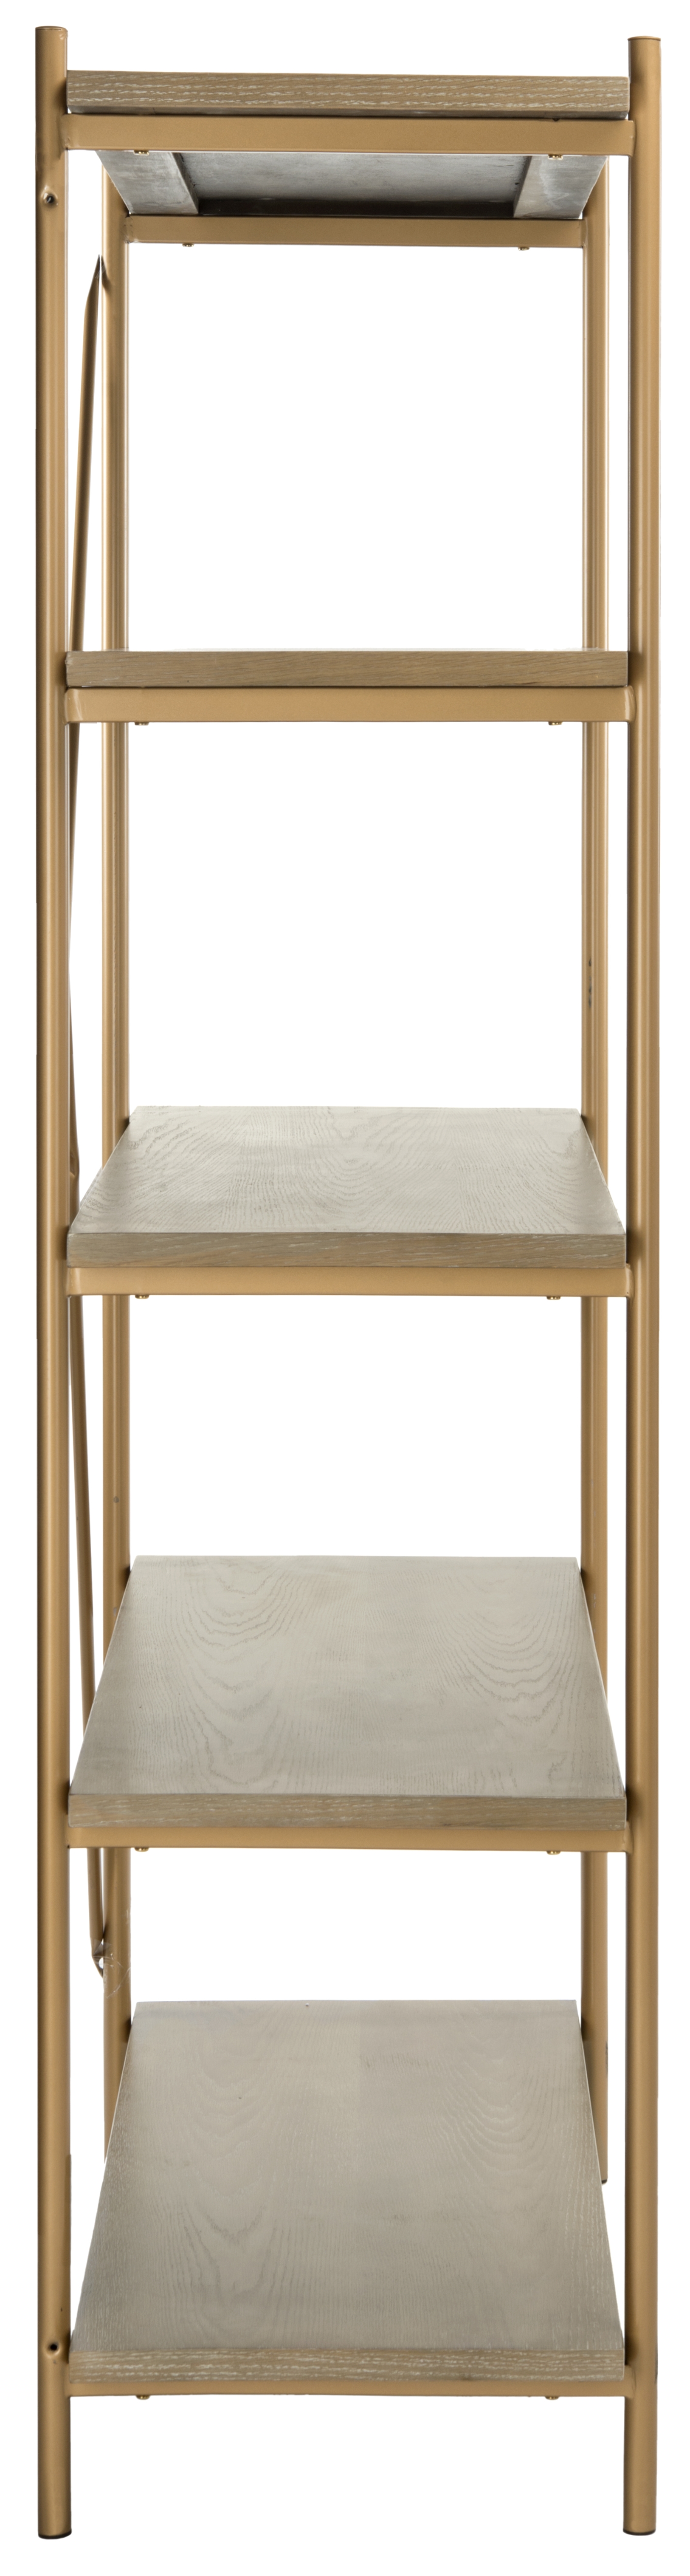 Rigby 5 Tier Etagere - Rustic Oak/Gold - Arlo Home - Image 2